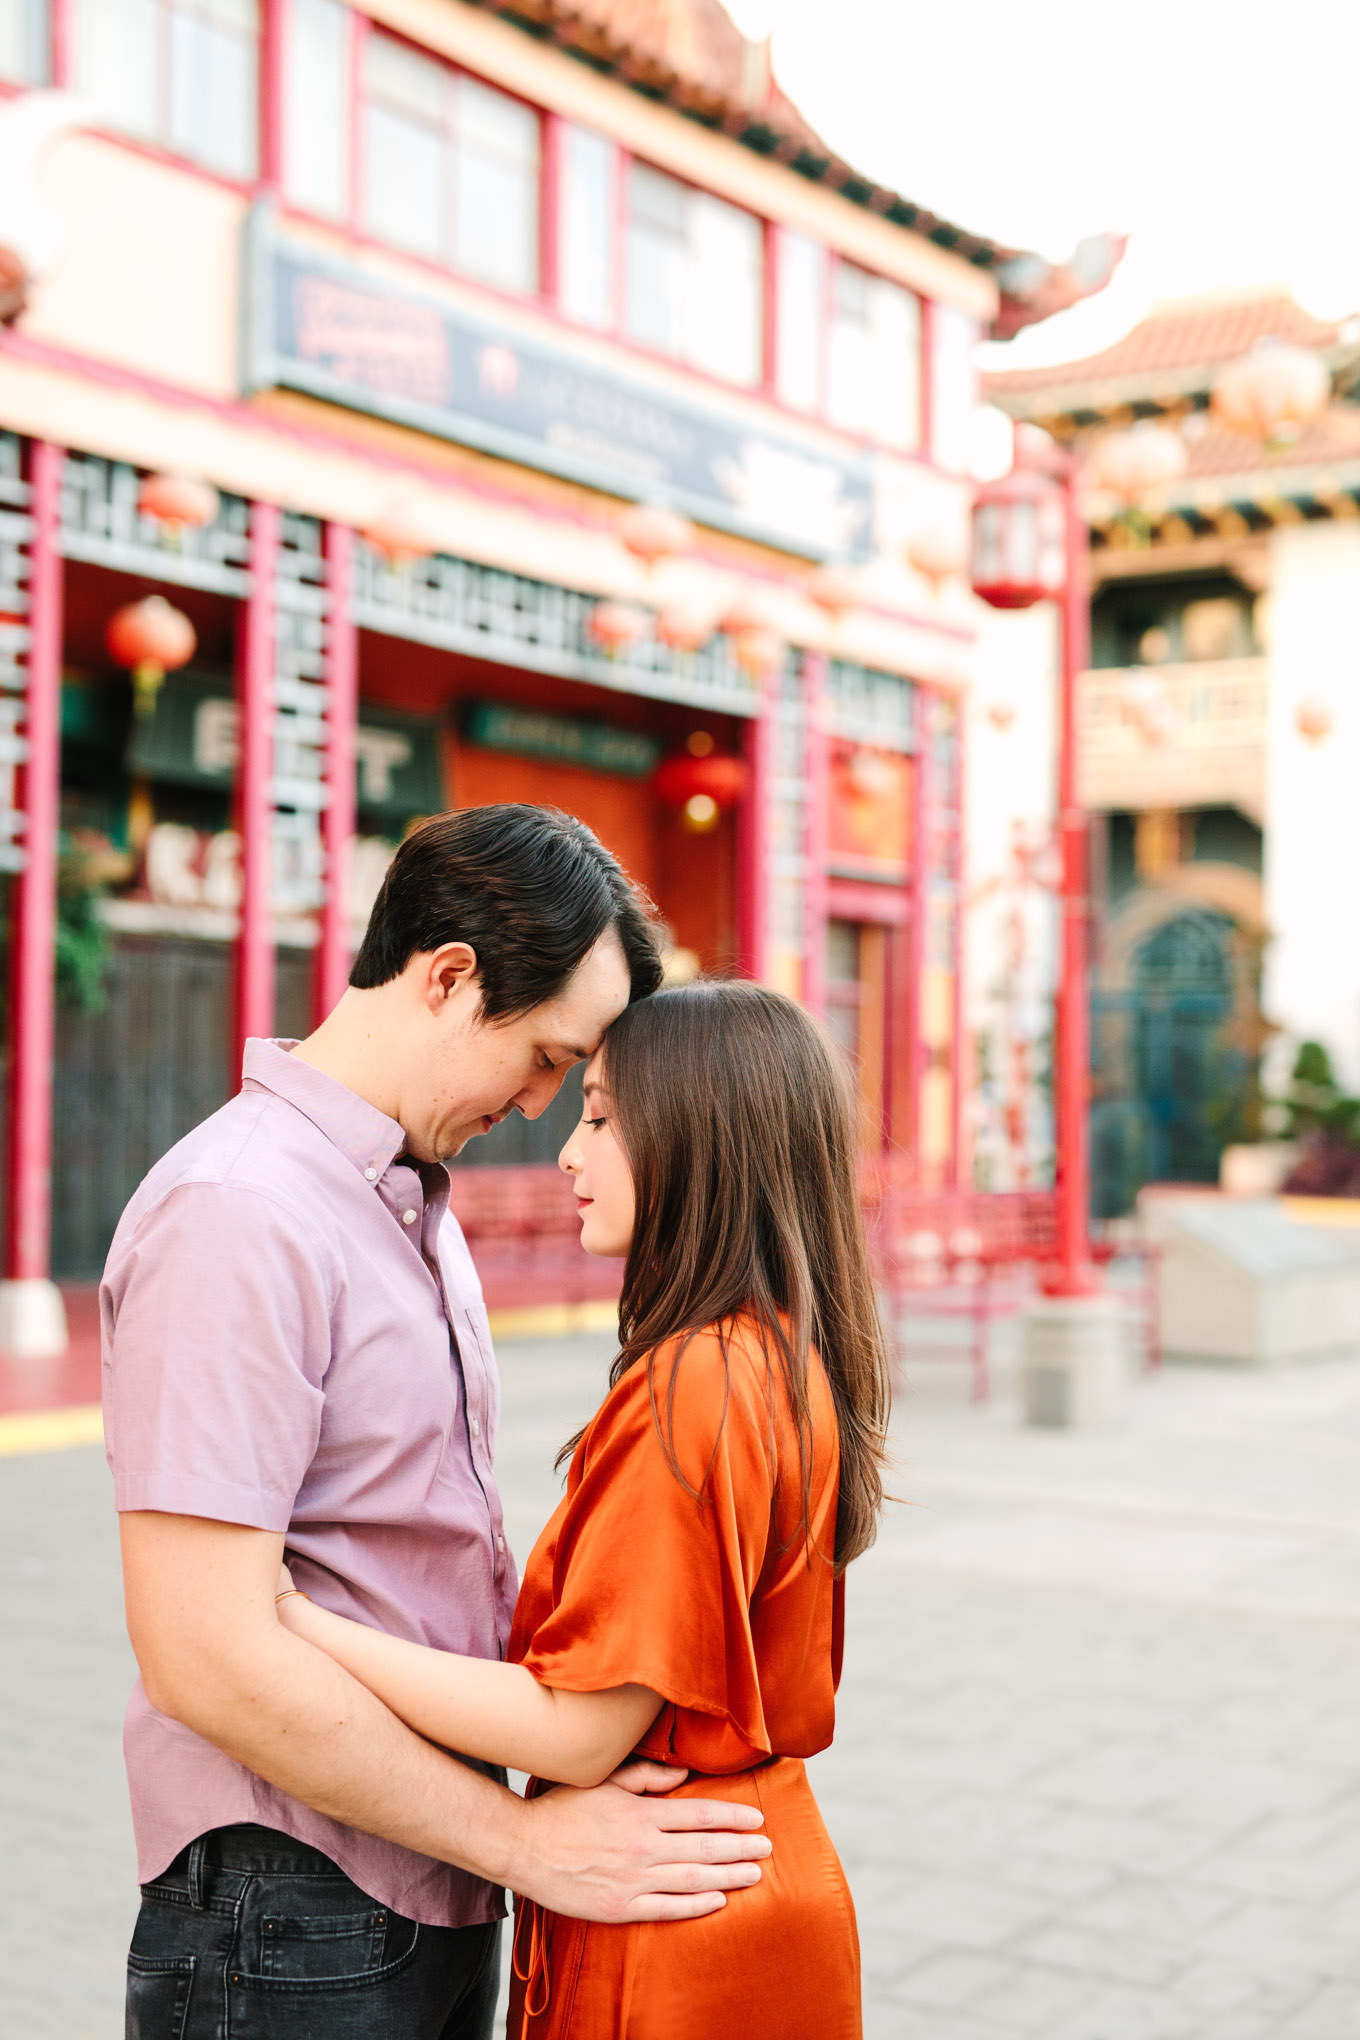 Los Angeles Chinatown engagement session | Engagement, elopement, and wedding photography roundup of Mary Costa’s favorite images from 2020 | Colorful and elevated photography for fun-loving couples in Southern California | #2020wedding #elopement #weddingphoto #weddingphotography #microwedding   Source: Mary Costa Photography | Los Angeles